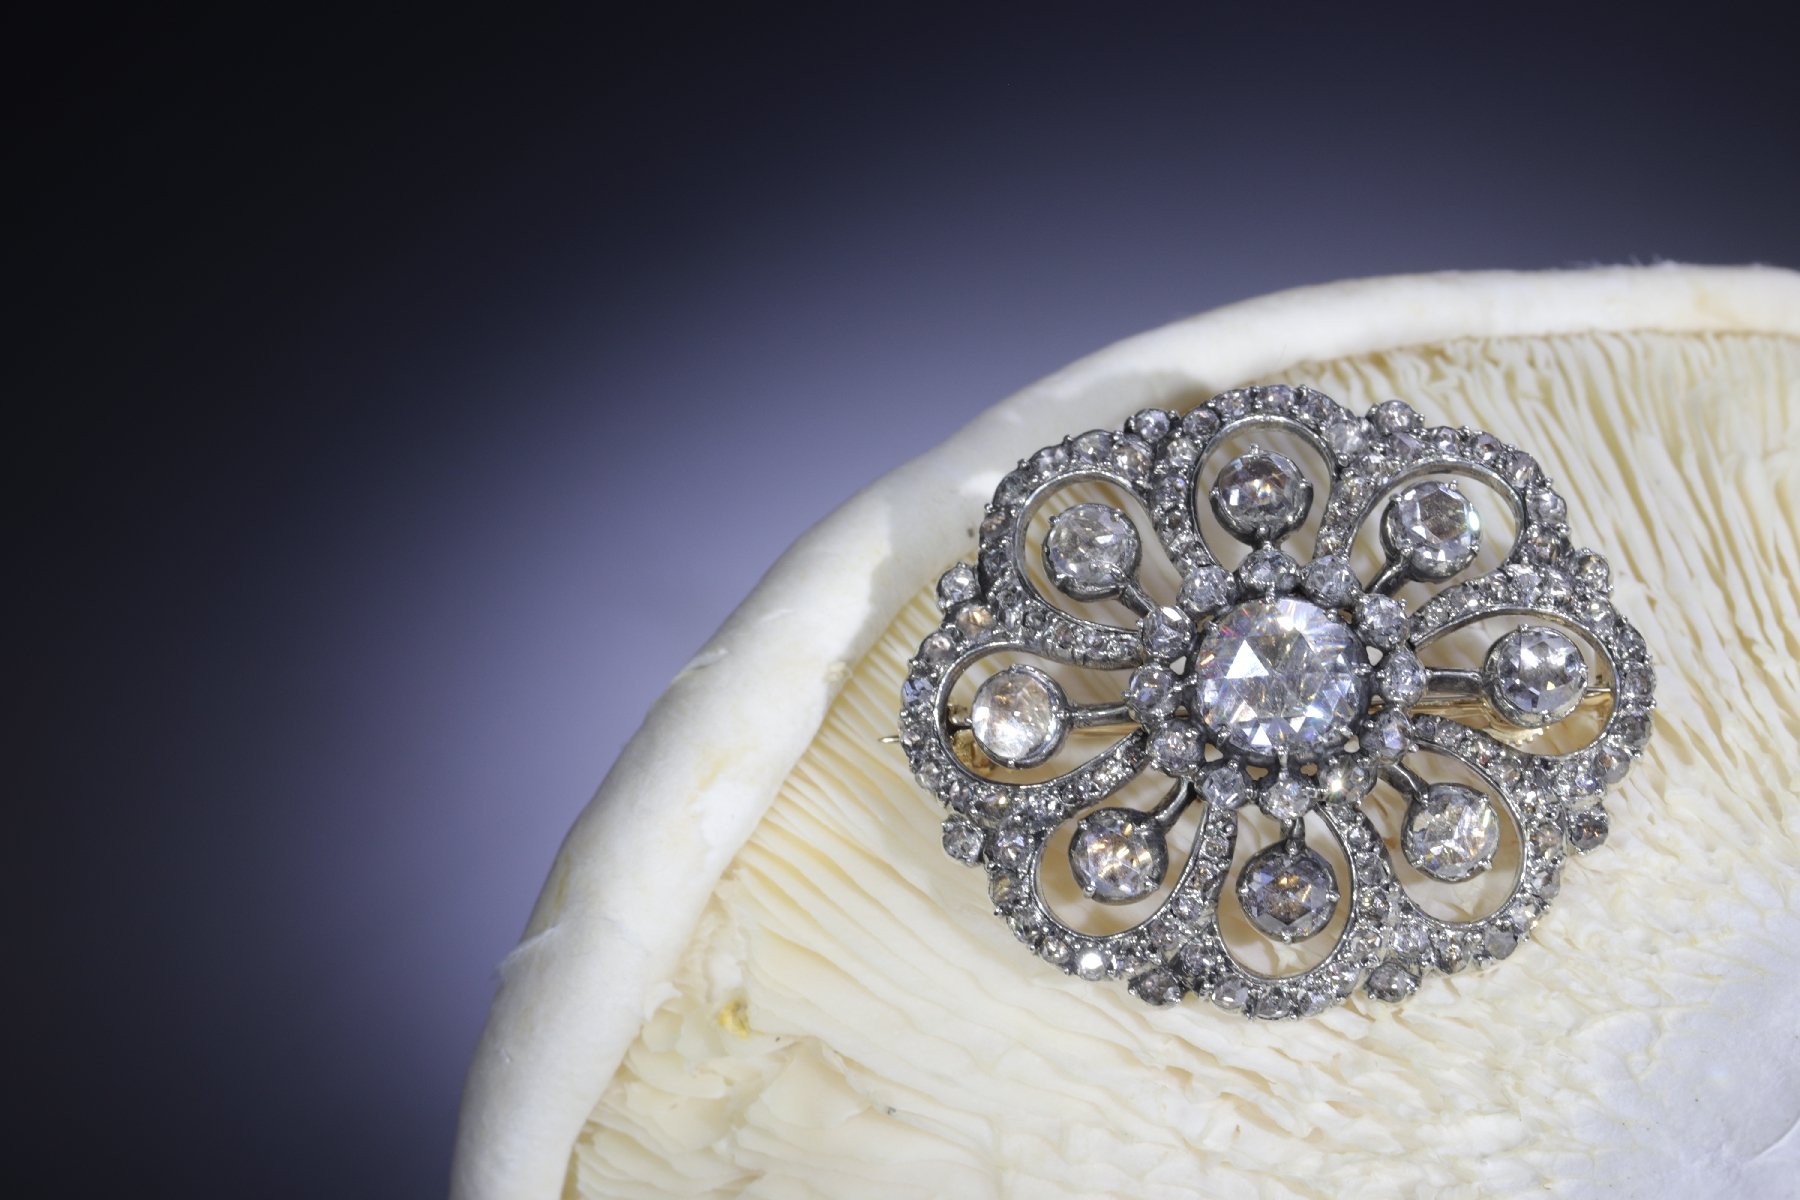 Click the picture to get to see this Typical Dutch antique rose cut diamond jewel brooch.